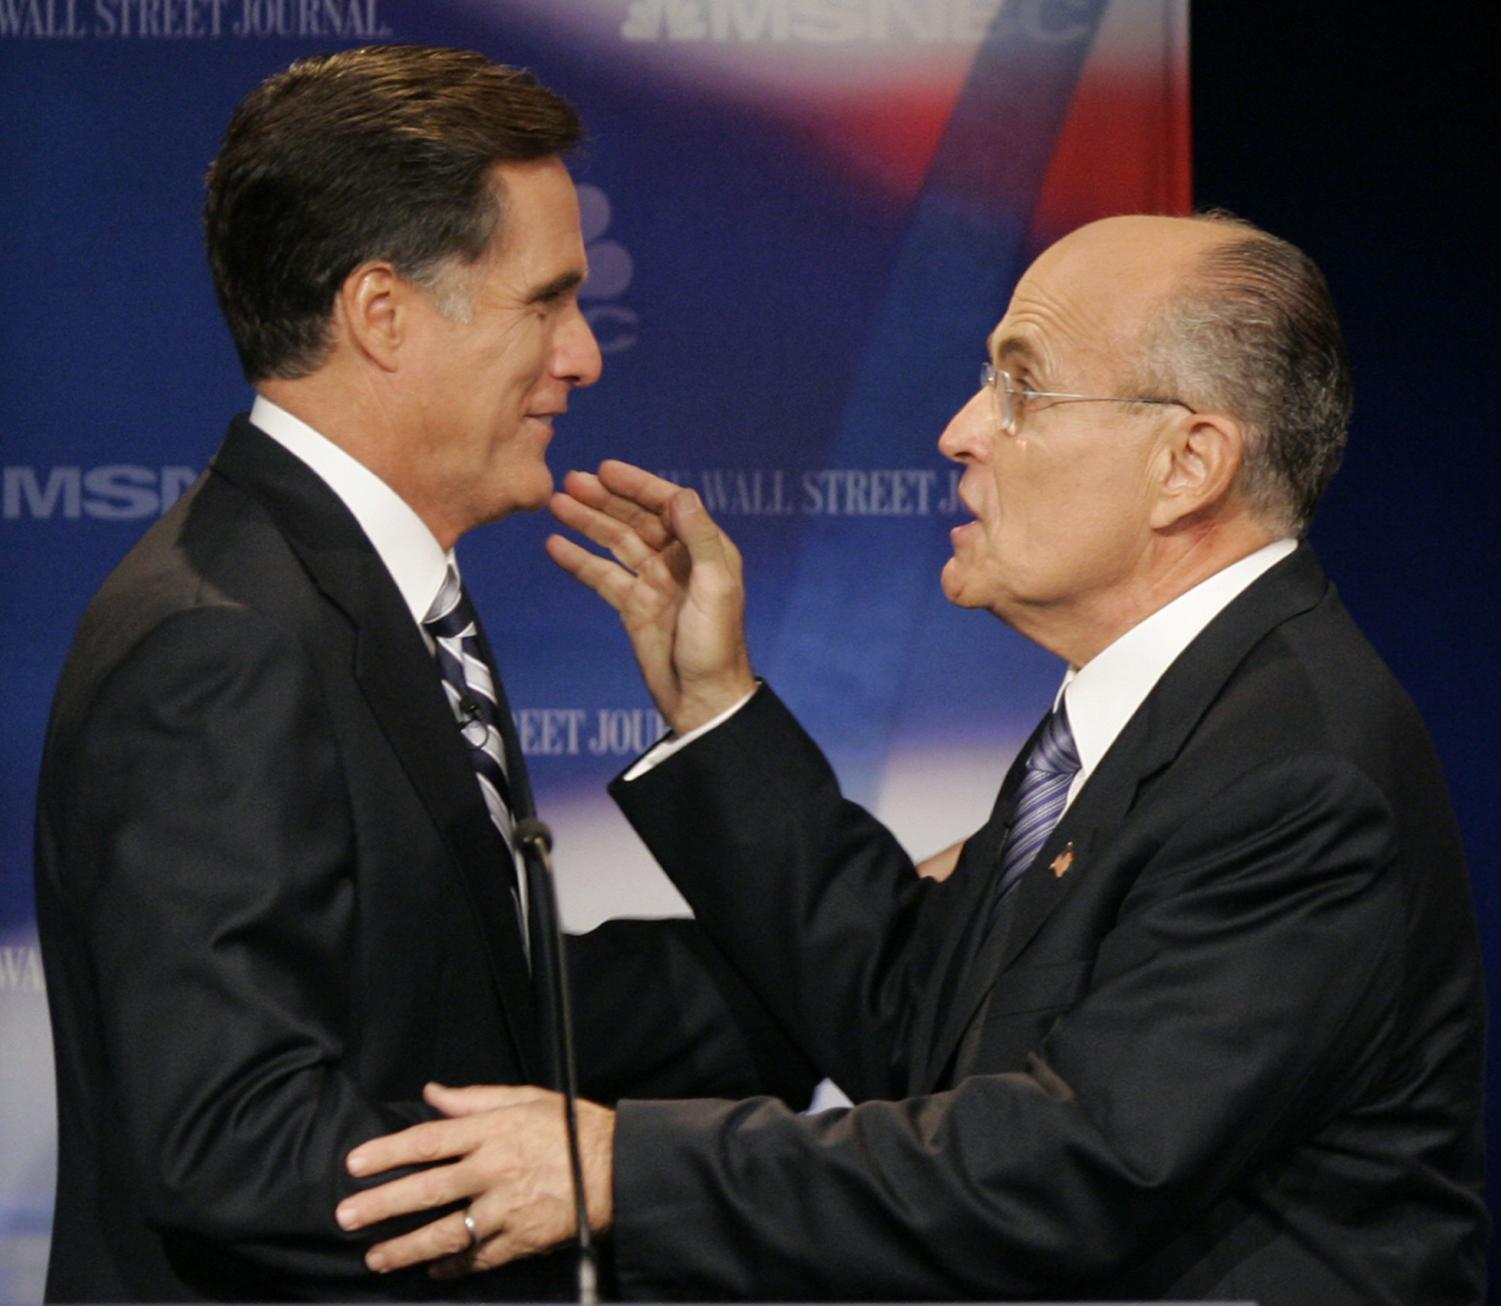 Mitt Romney, left, and Rudy Giuliani talk to each other after the GOP Presidential candidates debate in Dearborn, Mich. on Oct. 9, 2007 file photo. The candidates will face off again Wednesday. (AP Photo)